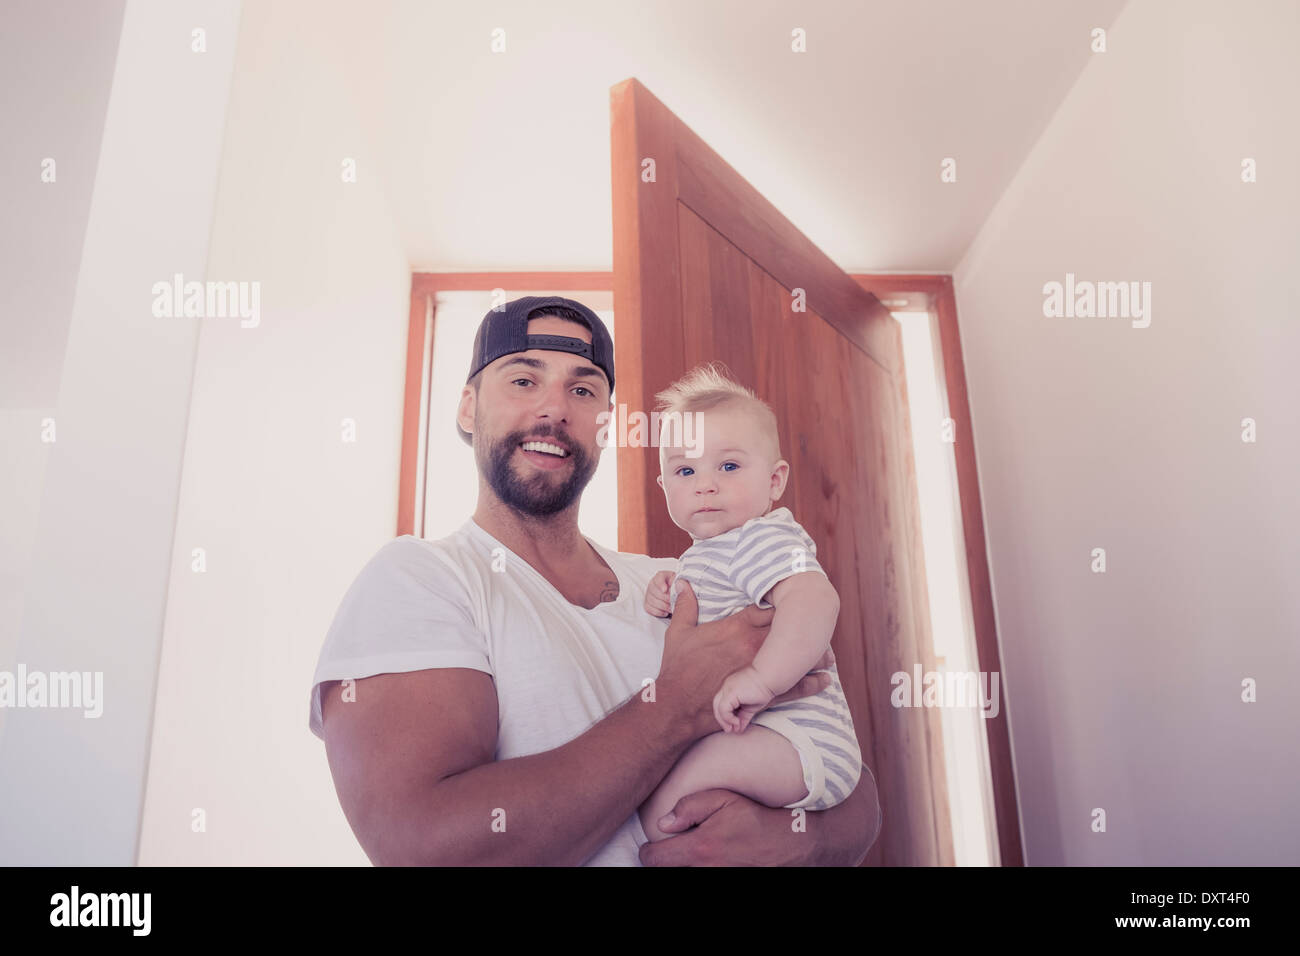 Portrait of smiling father holding baby son in doorway Stock Photo